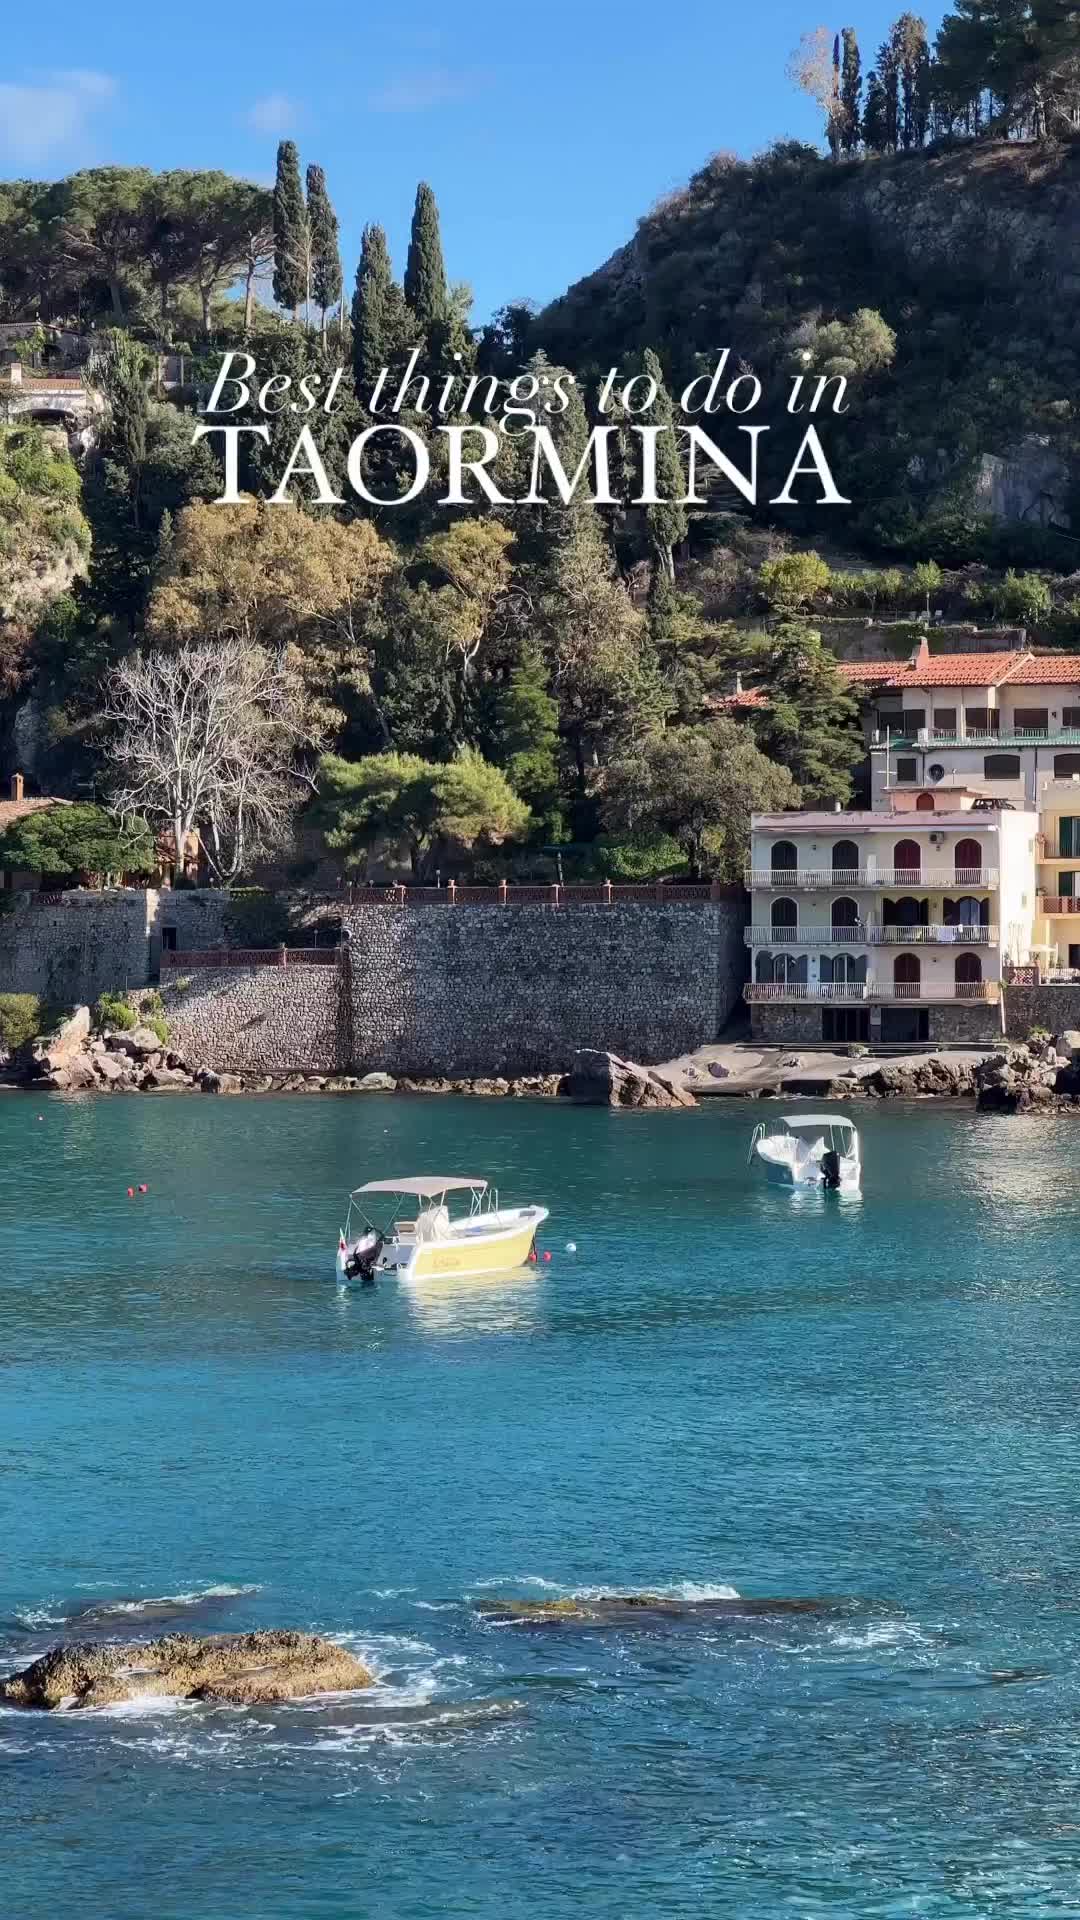 Top 10 Things to Do in Taormina, Sicily 🌴☀️🍋